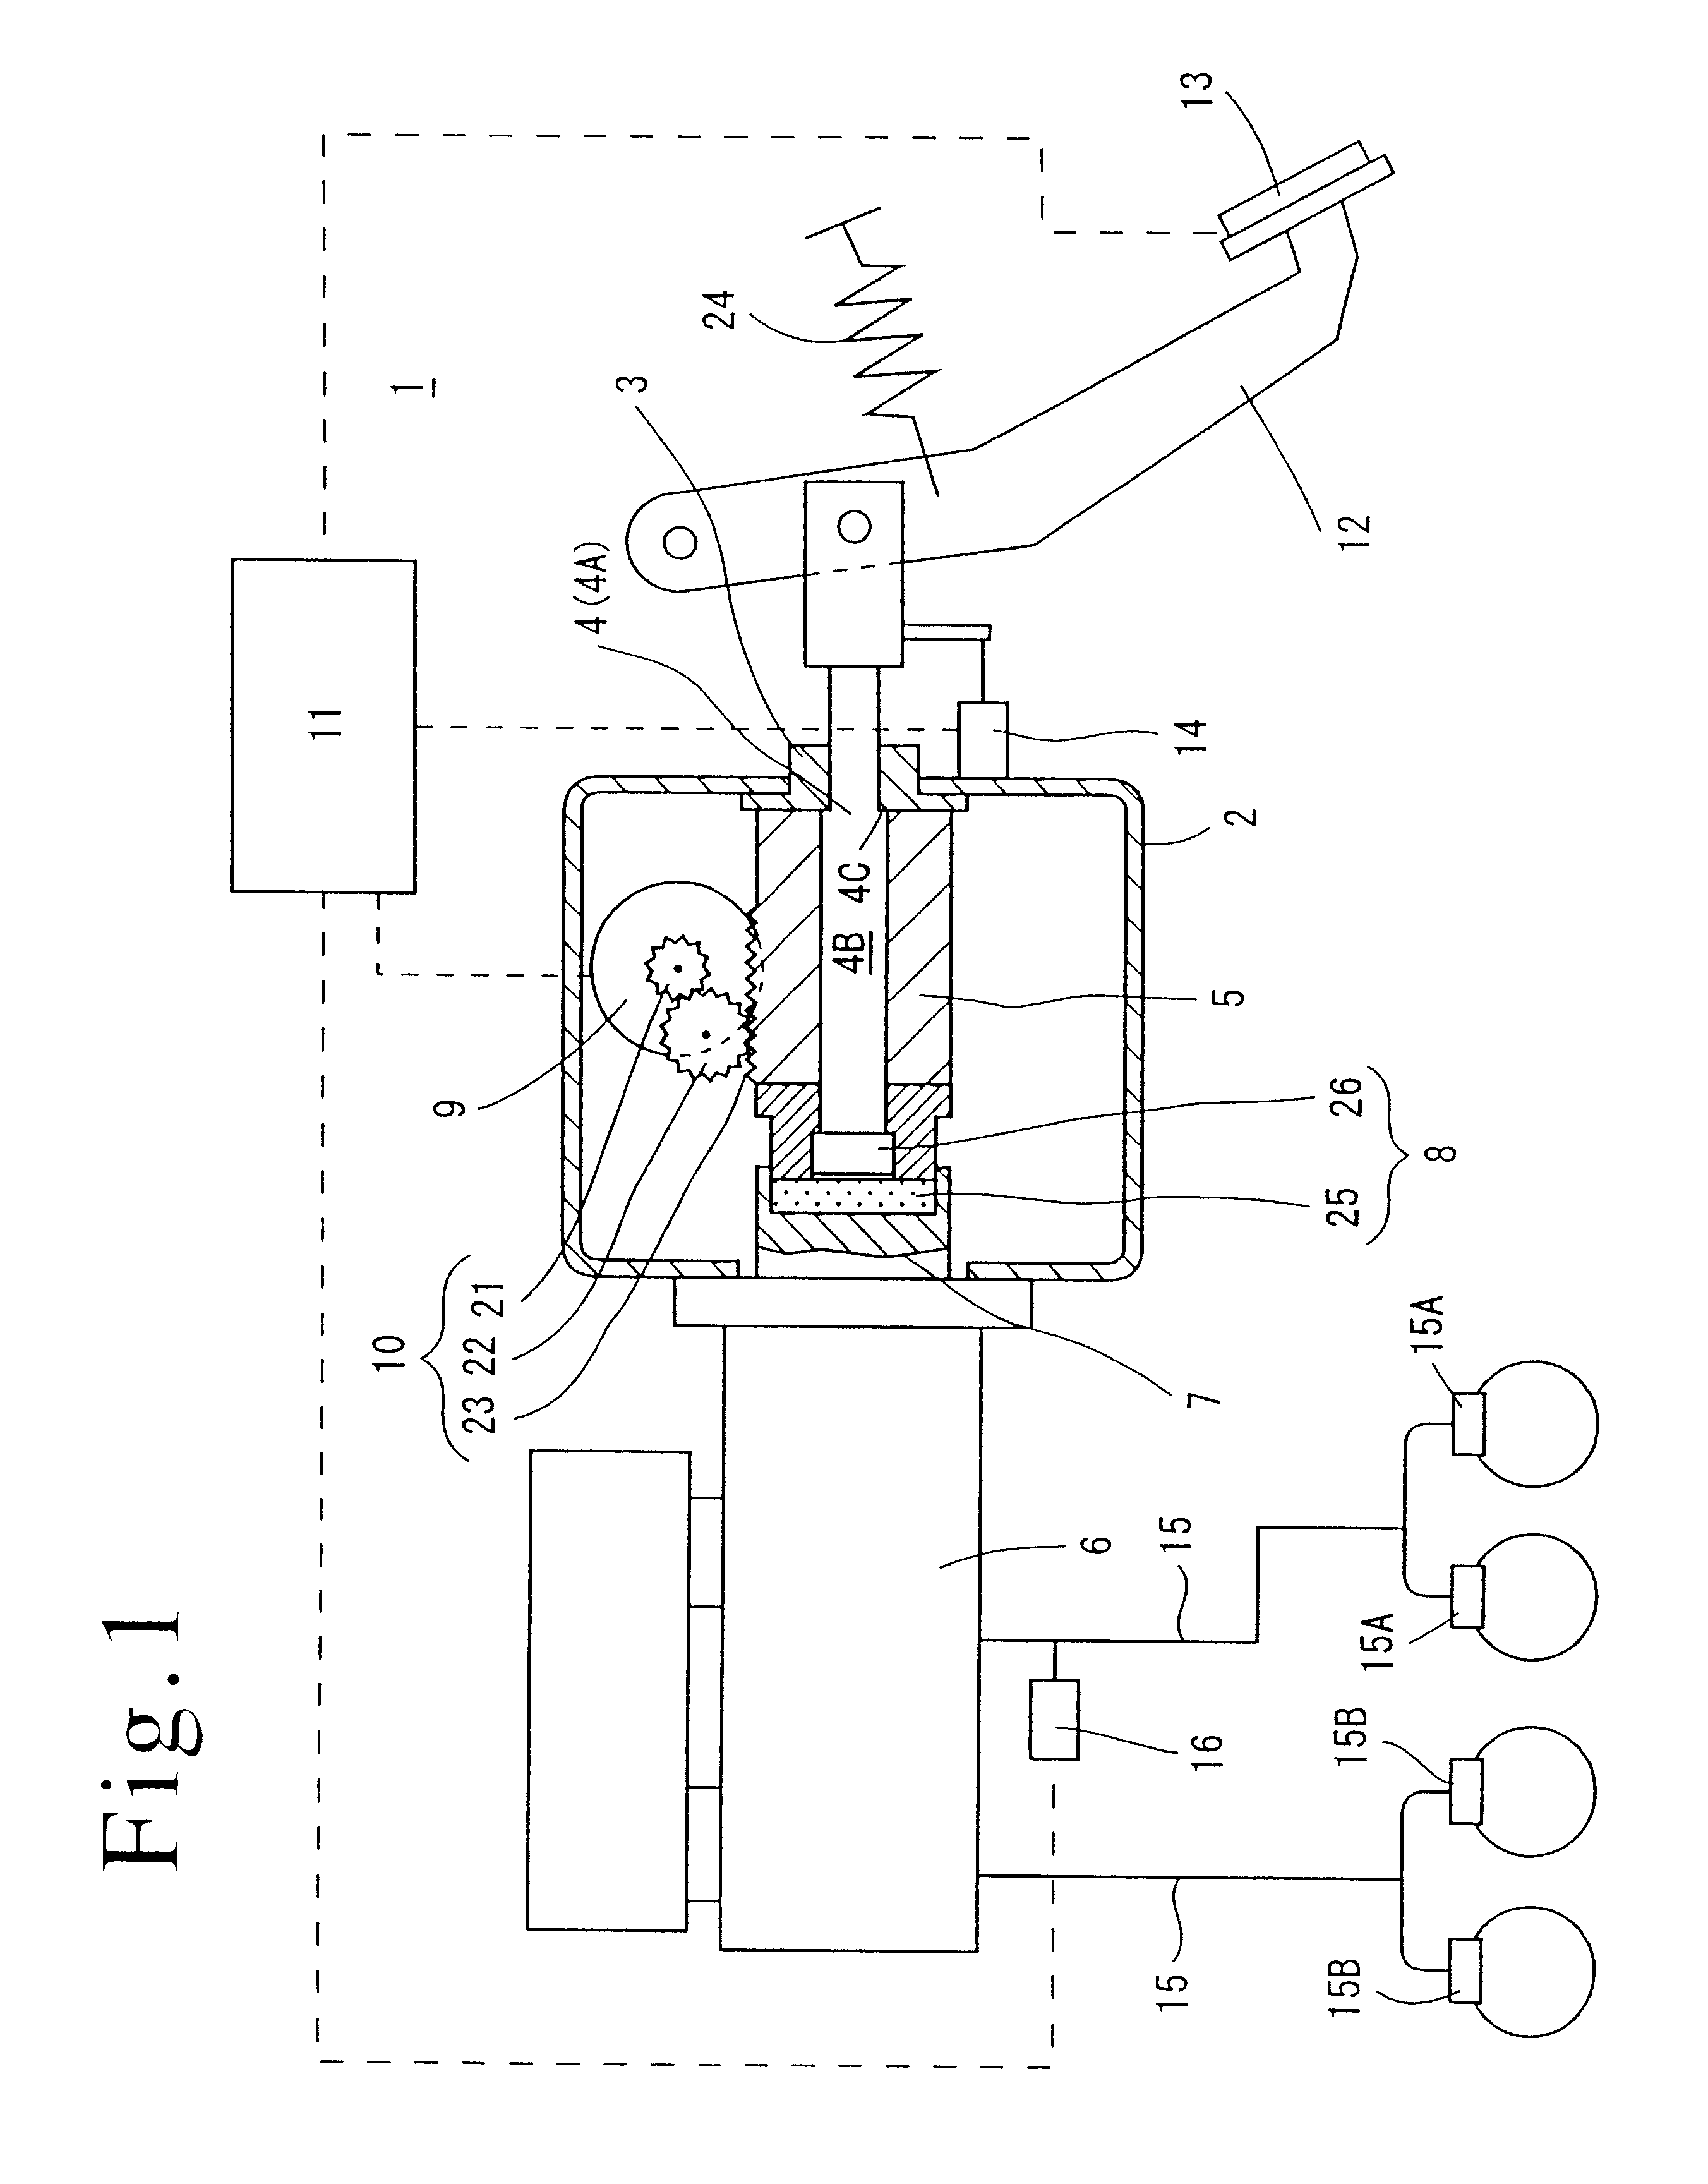 Electrically driven brake booster